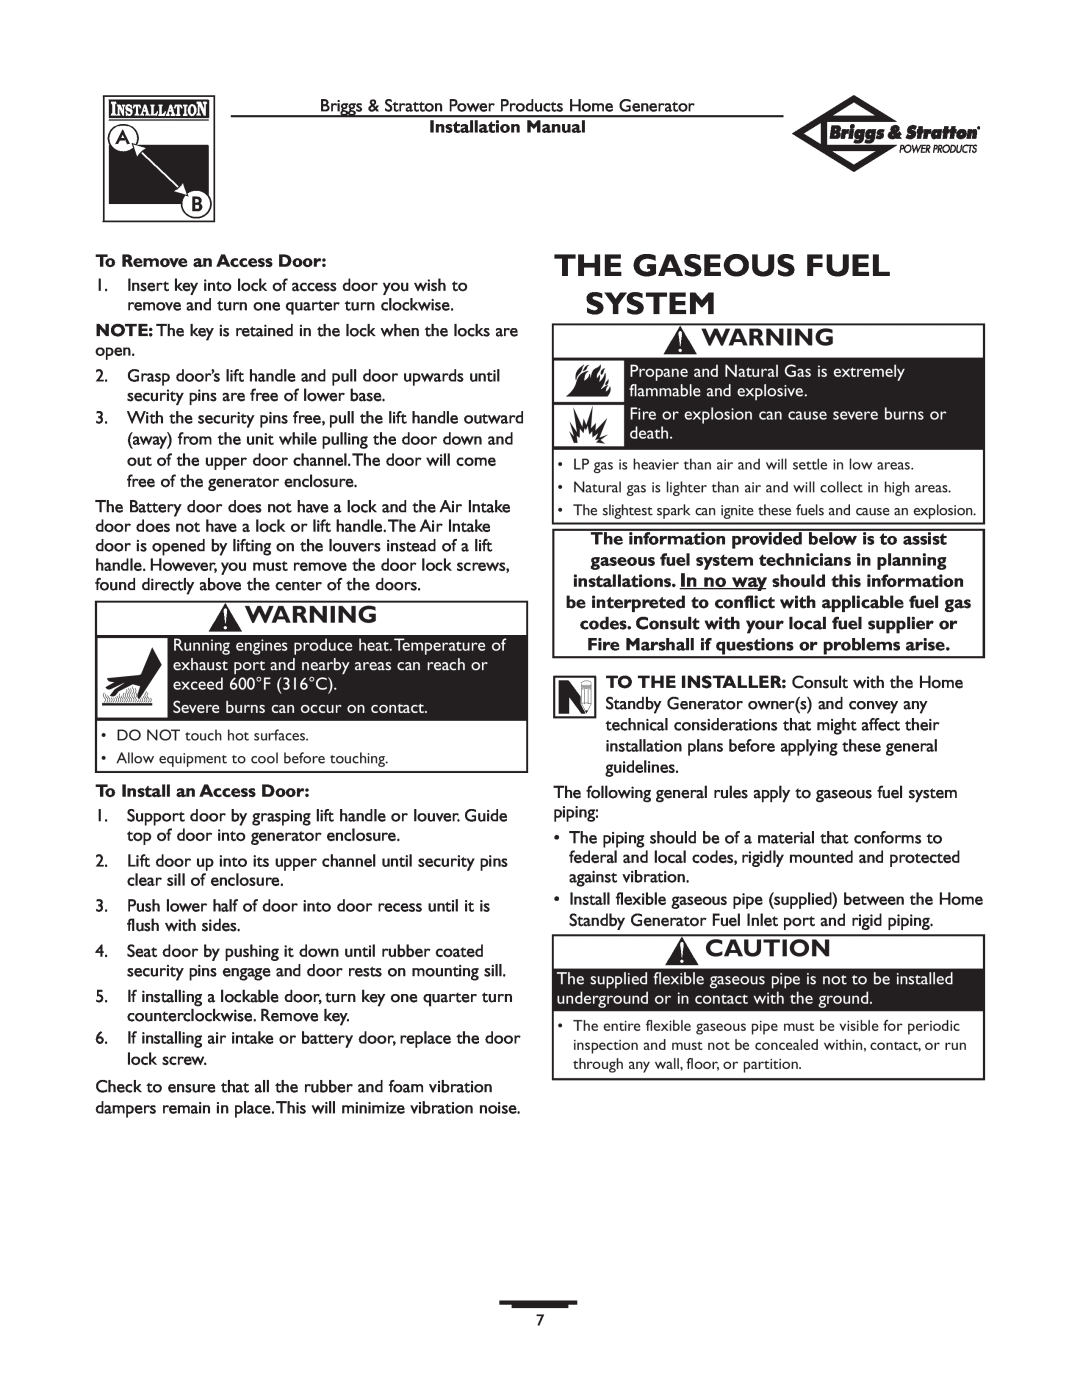 Briggs & Stratton 01938-0 manual The Gaseous Fuel System, To Remove an Access Door, To Install an Access Door 